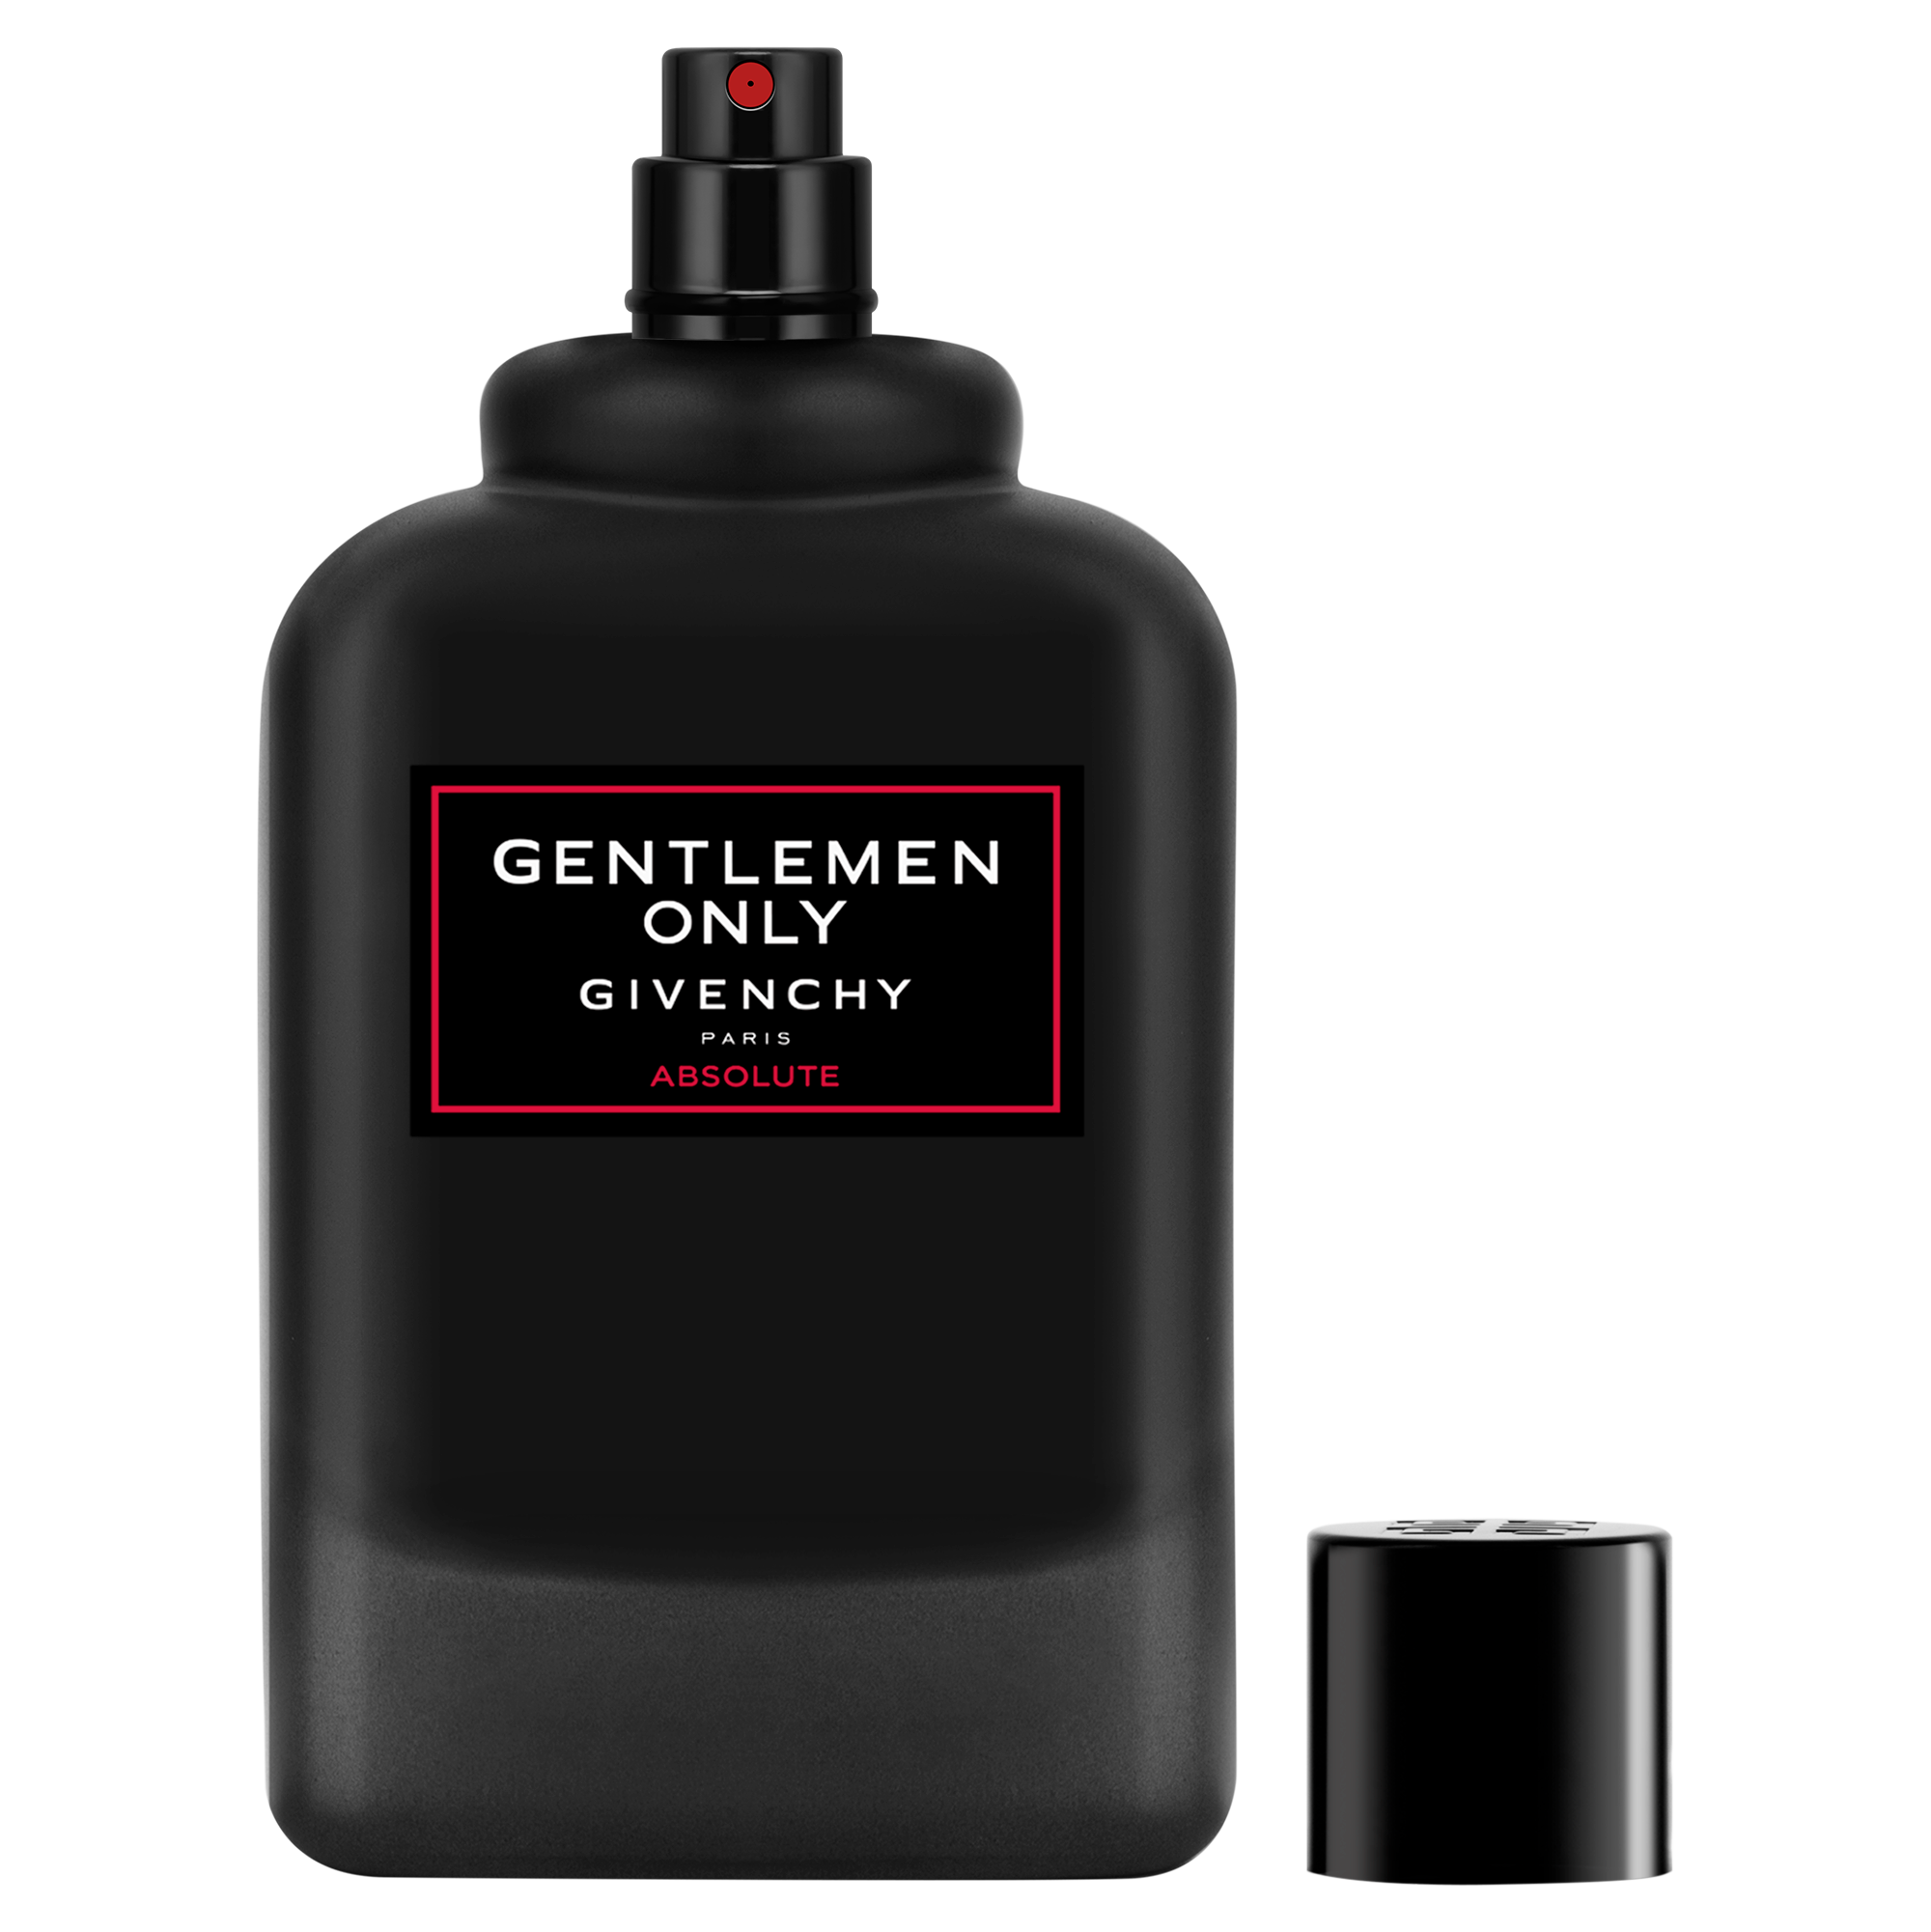 Only absolute. Givenchy Gentlemen only absolute. Absolut Gentleman only absolute Givenchy. Givenchy Gentlemen only Eau de Toilette. Givenchy Gentleman absolute.